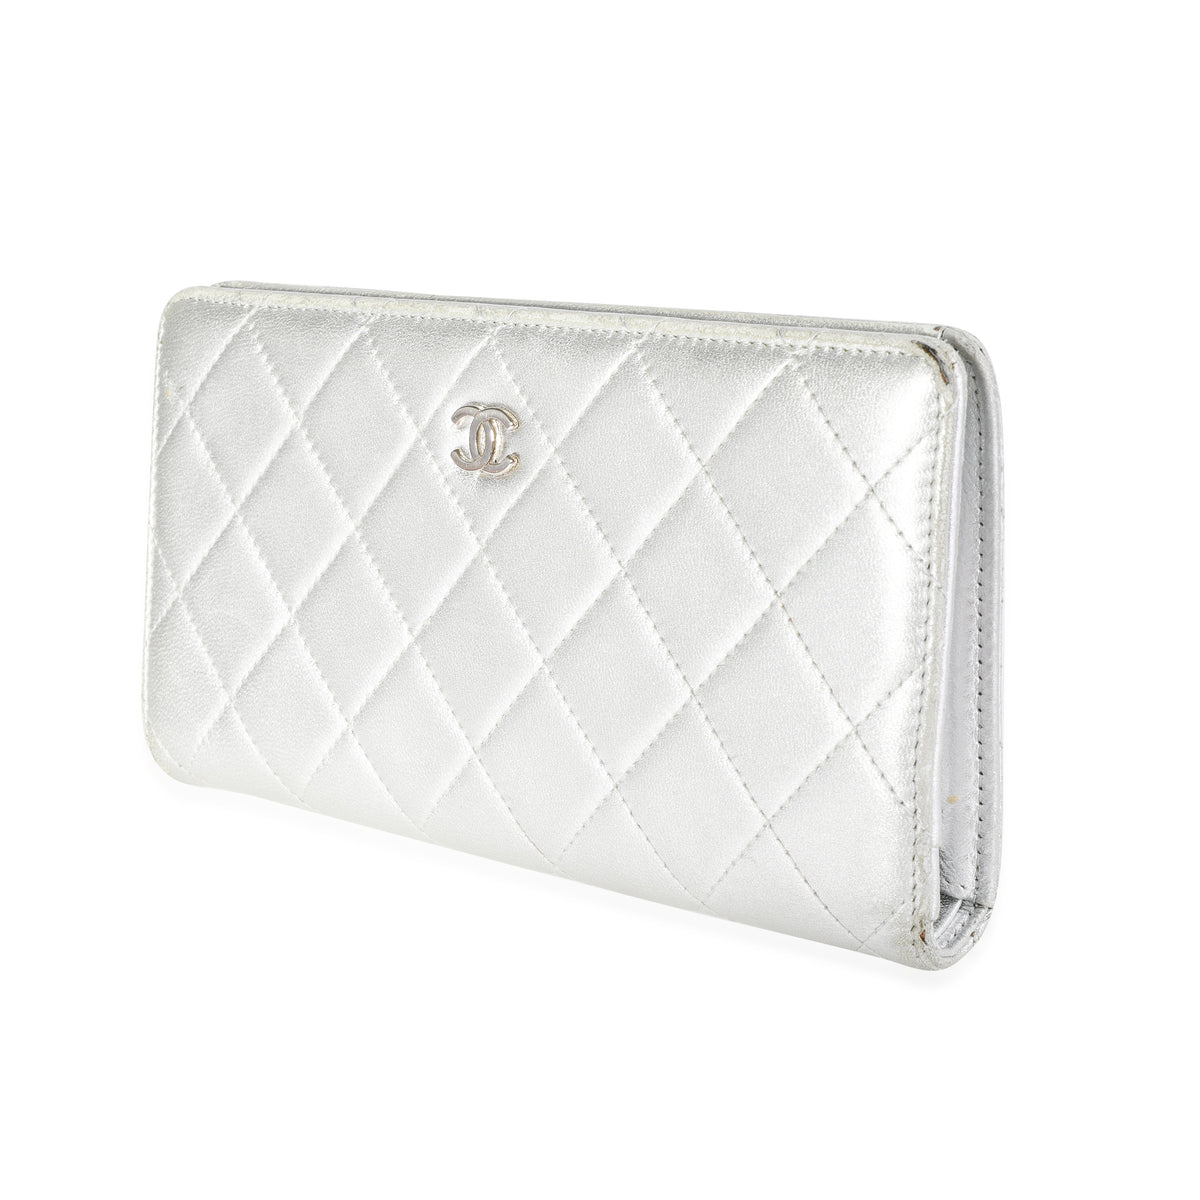 Chanel L Yen Quilted Lambskin Leather Wallet